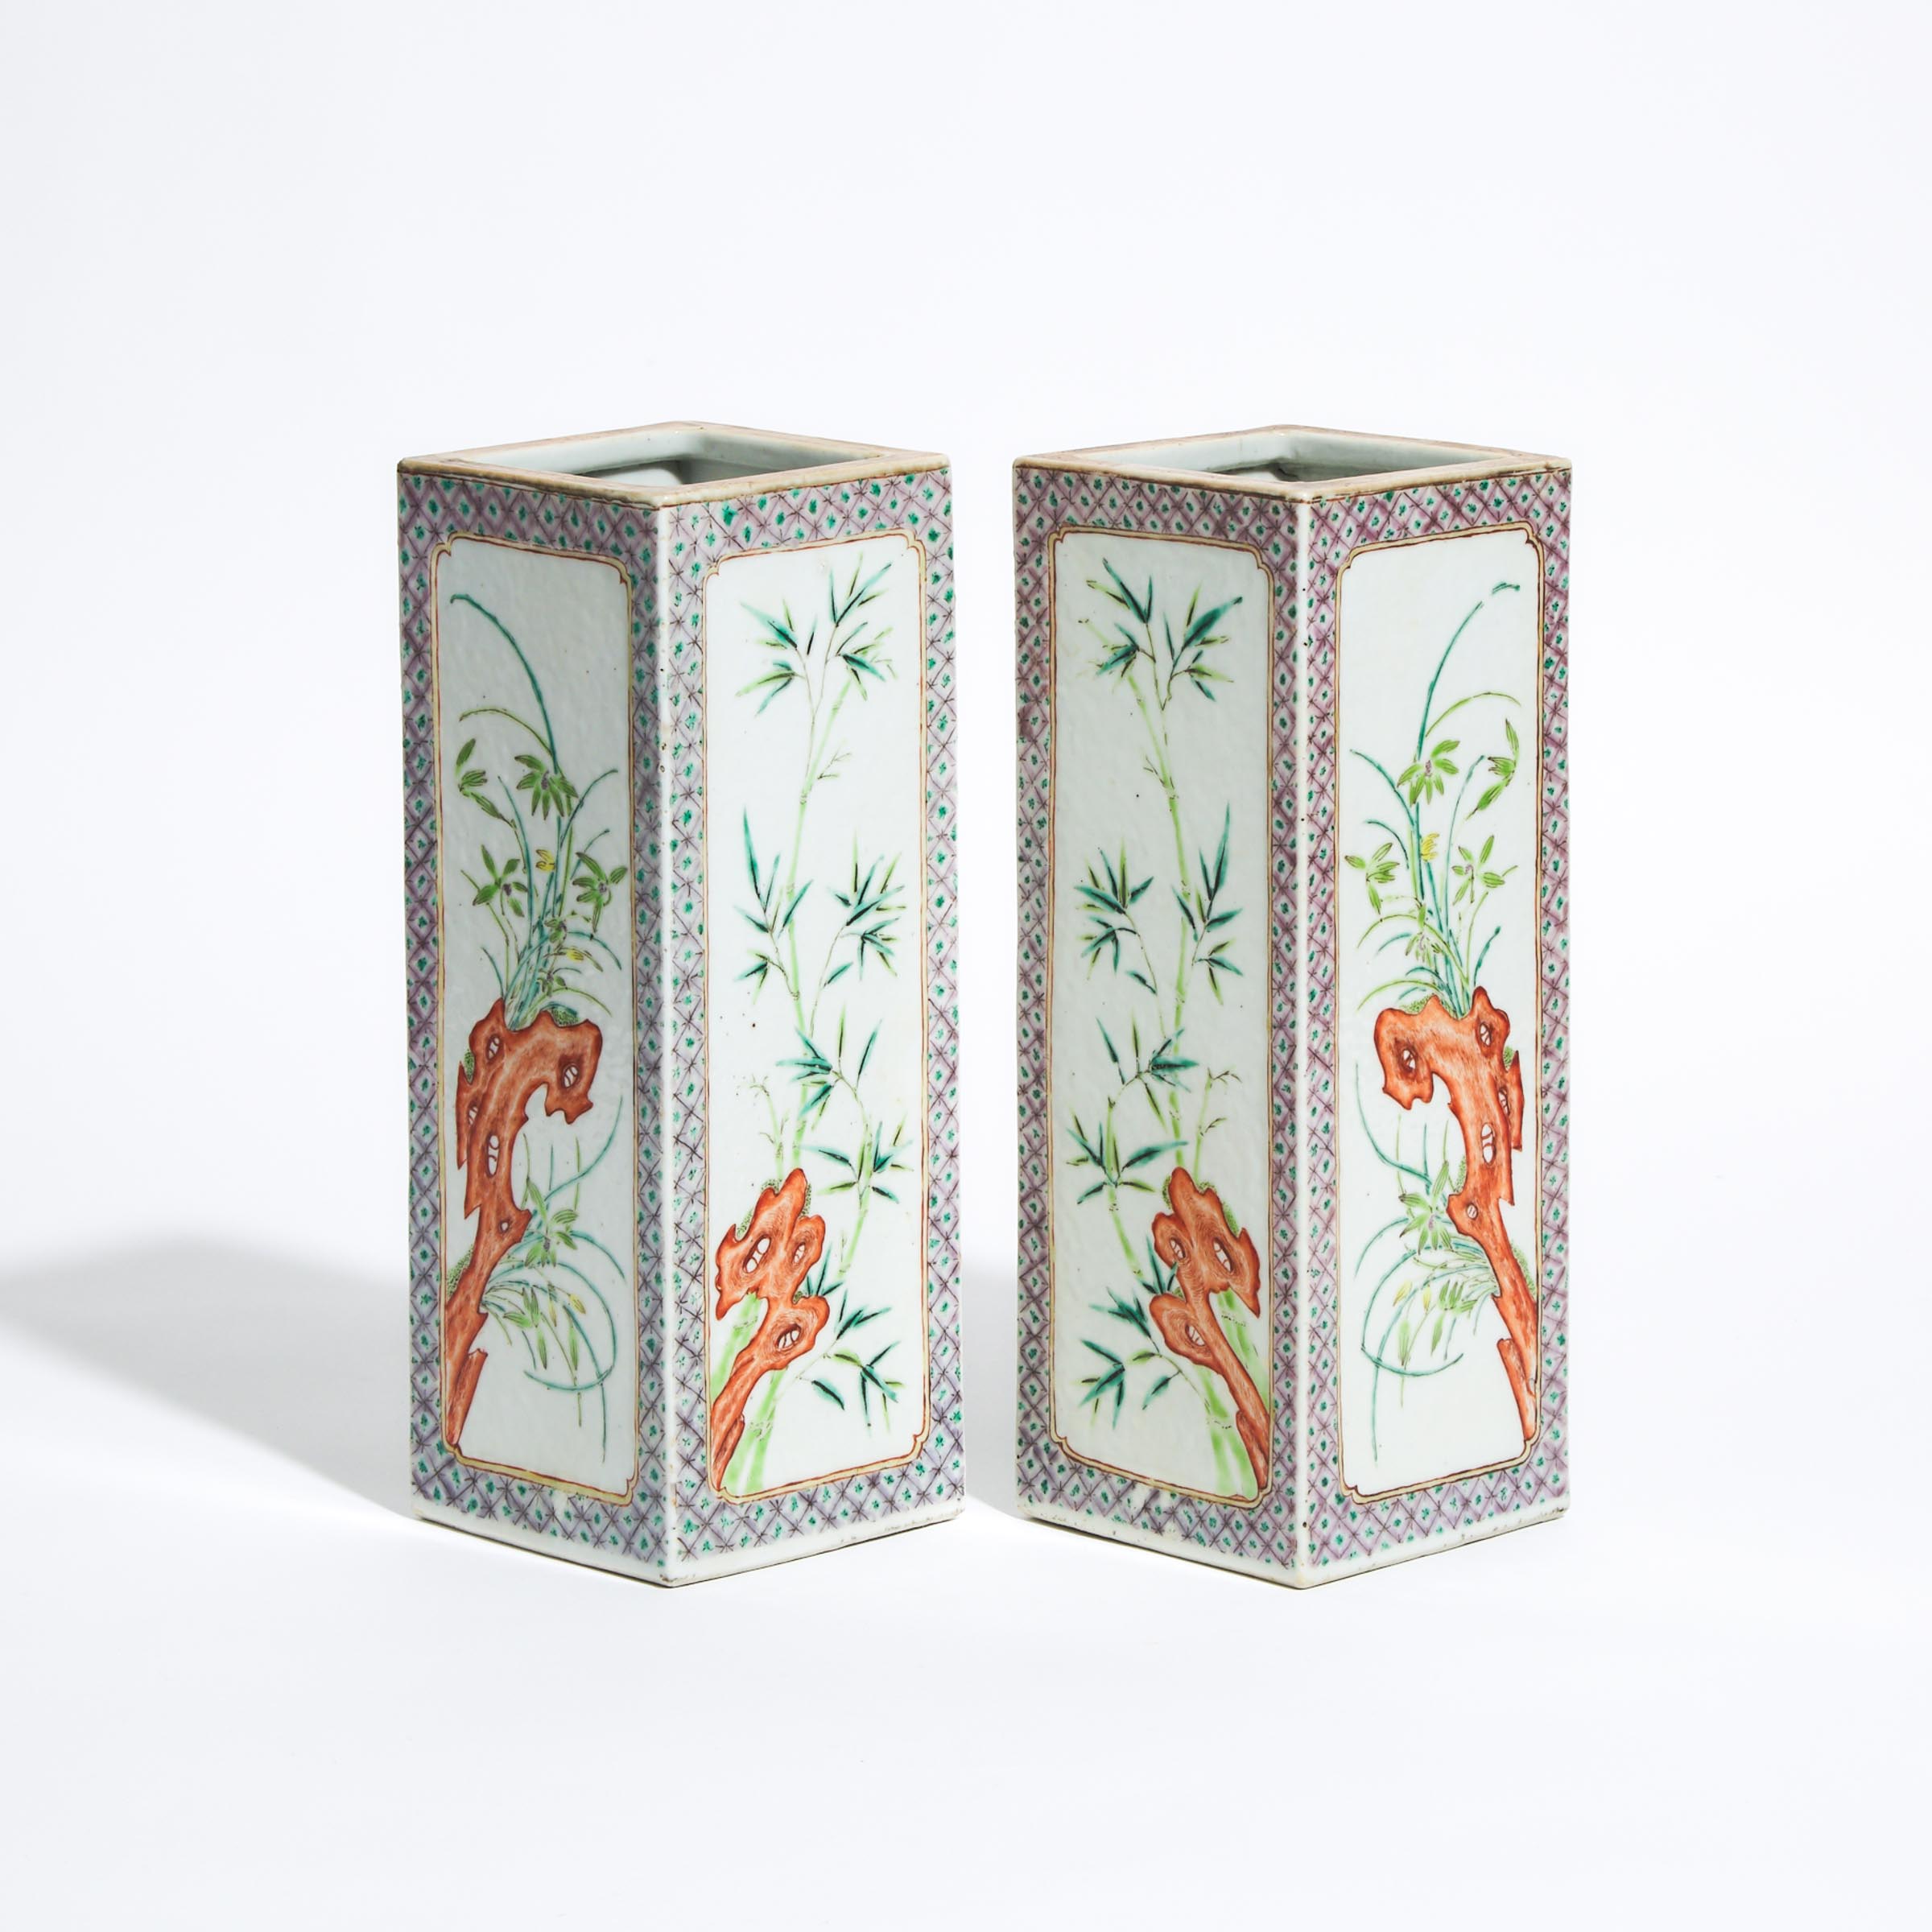 A Pair of Enameled Square Vases, Tongzhi Mark, Late 19th/Early 20th Century